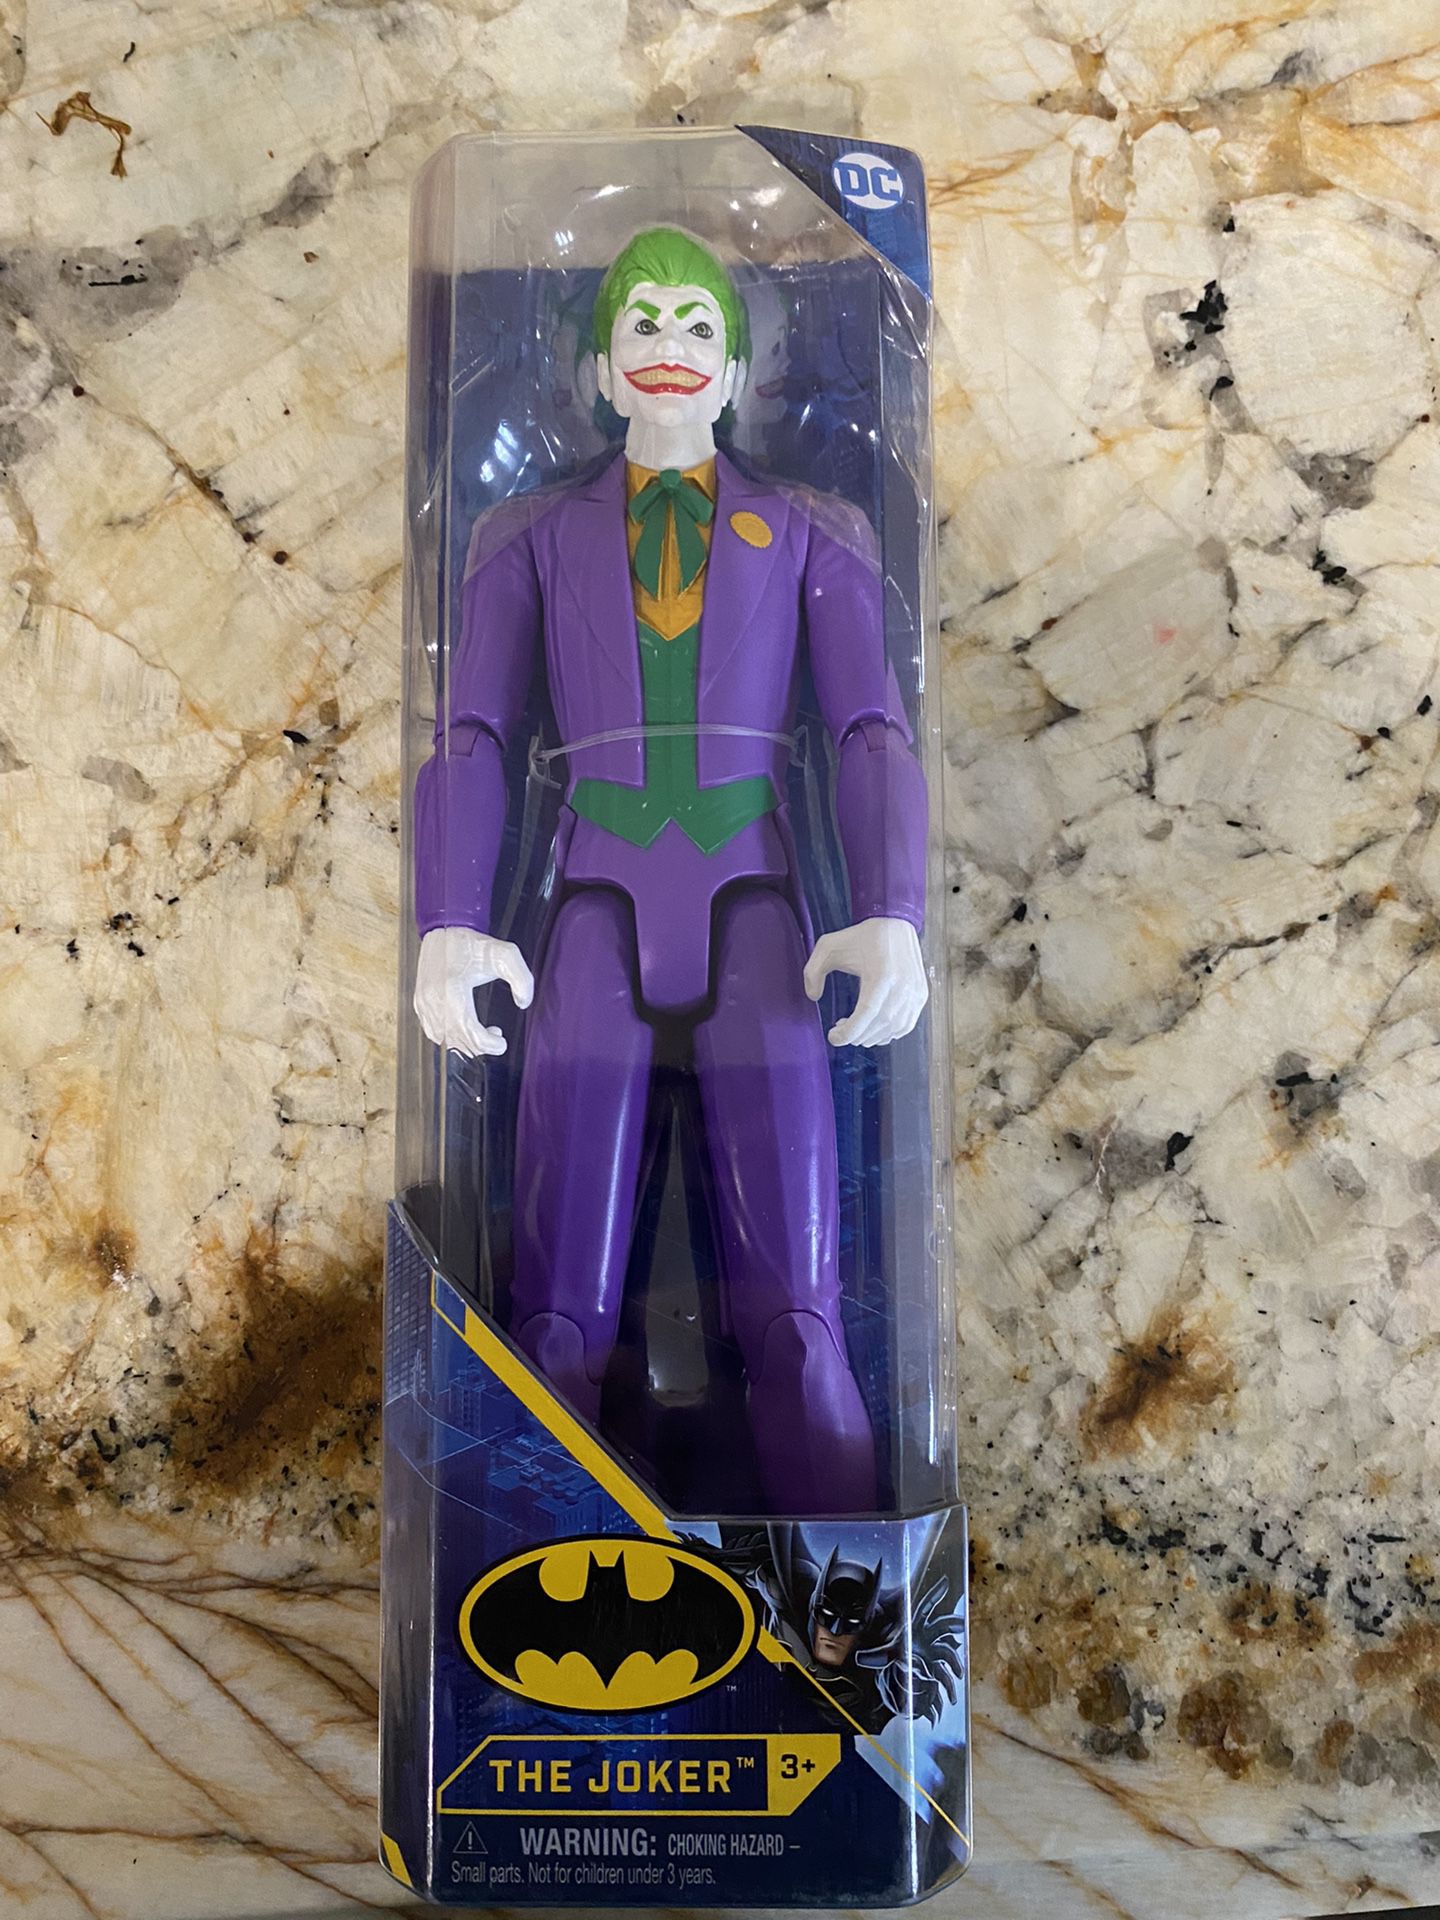  THE JOKER Action Figure 12inch   1st Edition 